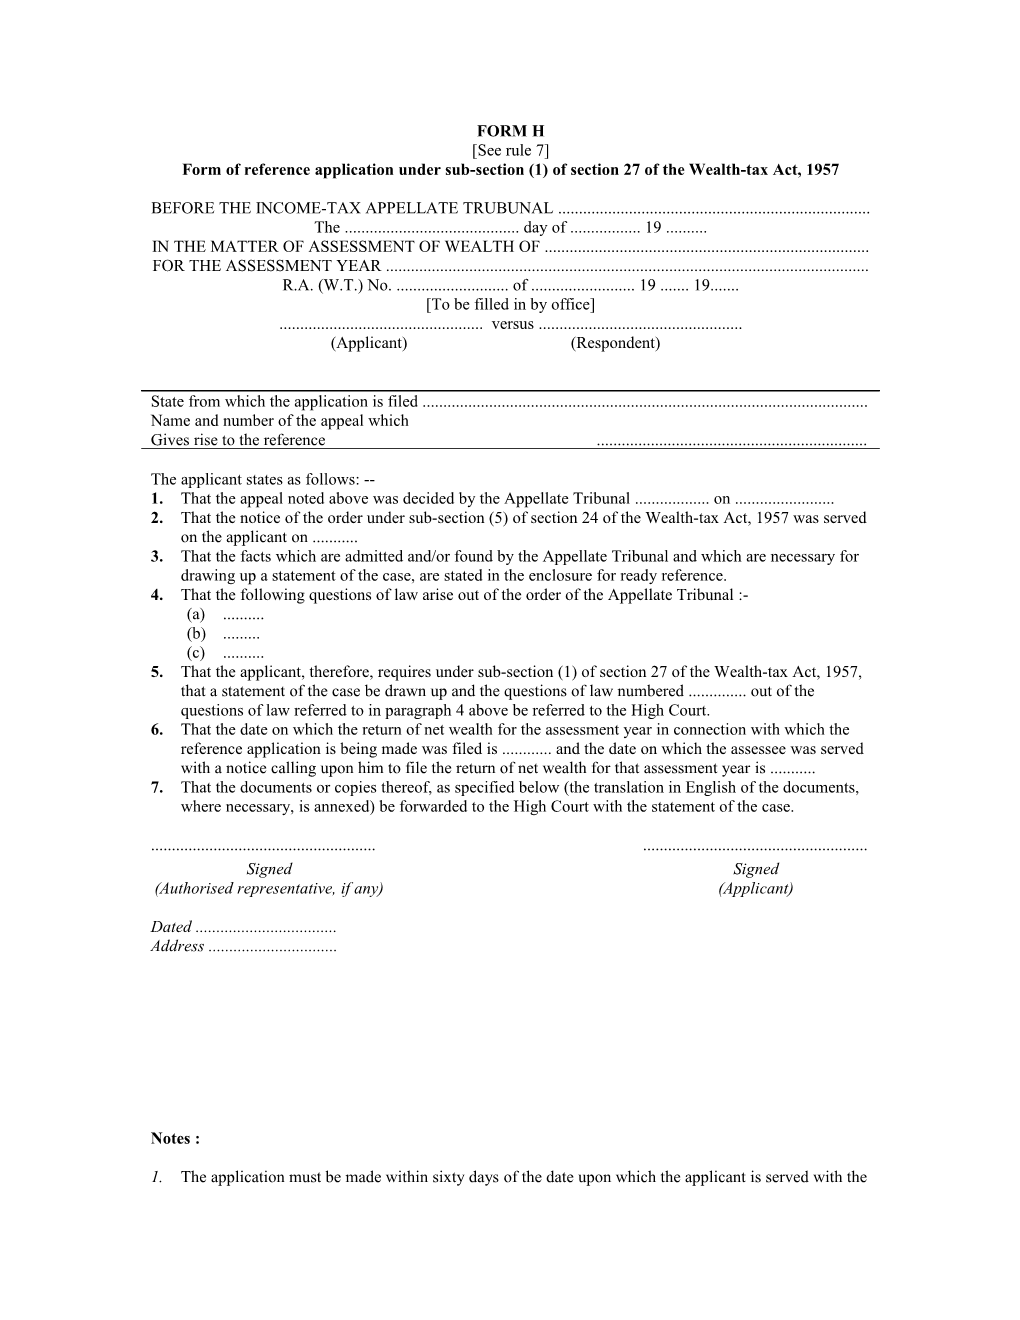 Form of Reference Application Under Sub-Section (1) of Section 27 of the Wealth-Tax Act, 1957